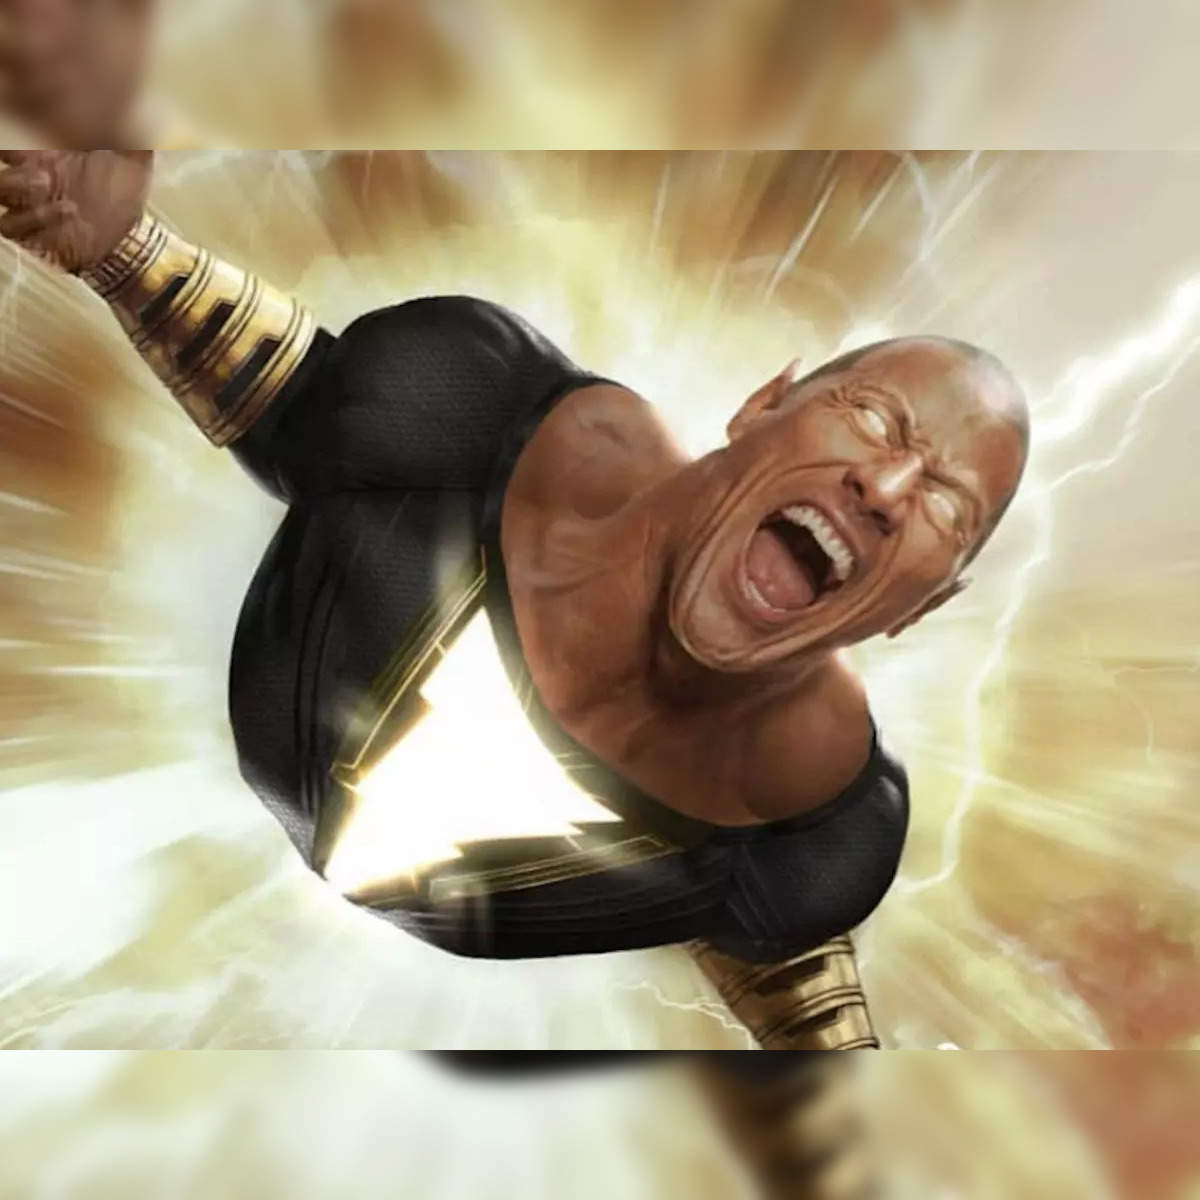 Black Adam' box office collection Day 4: Dwayne Johnson starrer records  strong Rs 24 crore debut on first weekend